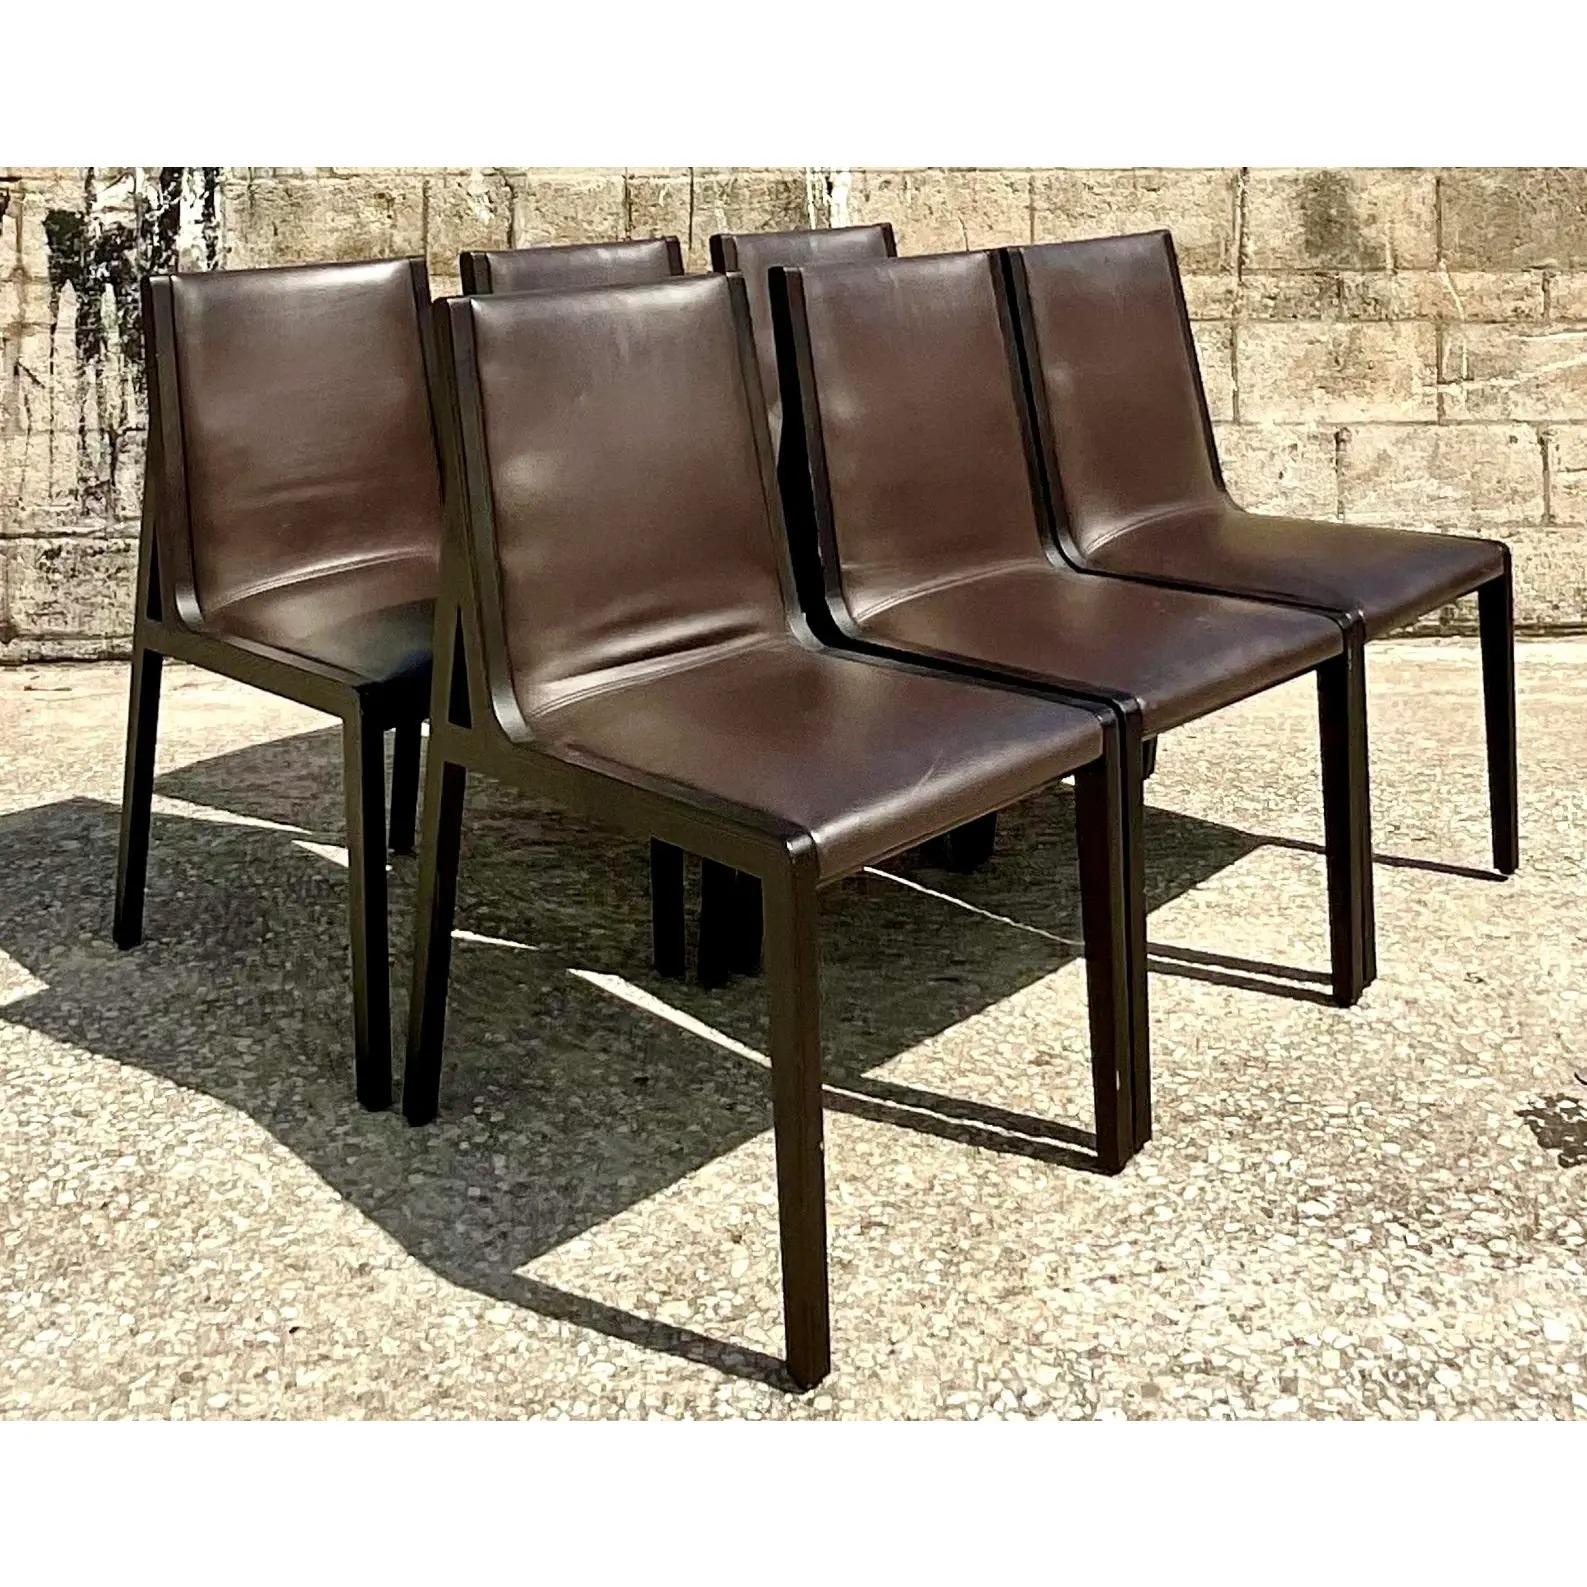 Fantastic set of 6 Camerich dining chairs. The chic Flora design in brown leather and ebony oak. Sleek and sophisticated. Acquired from a Palm Beach estate.